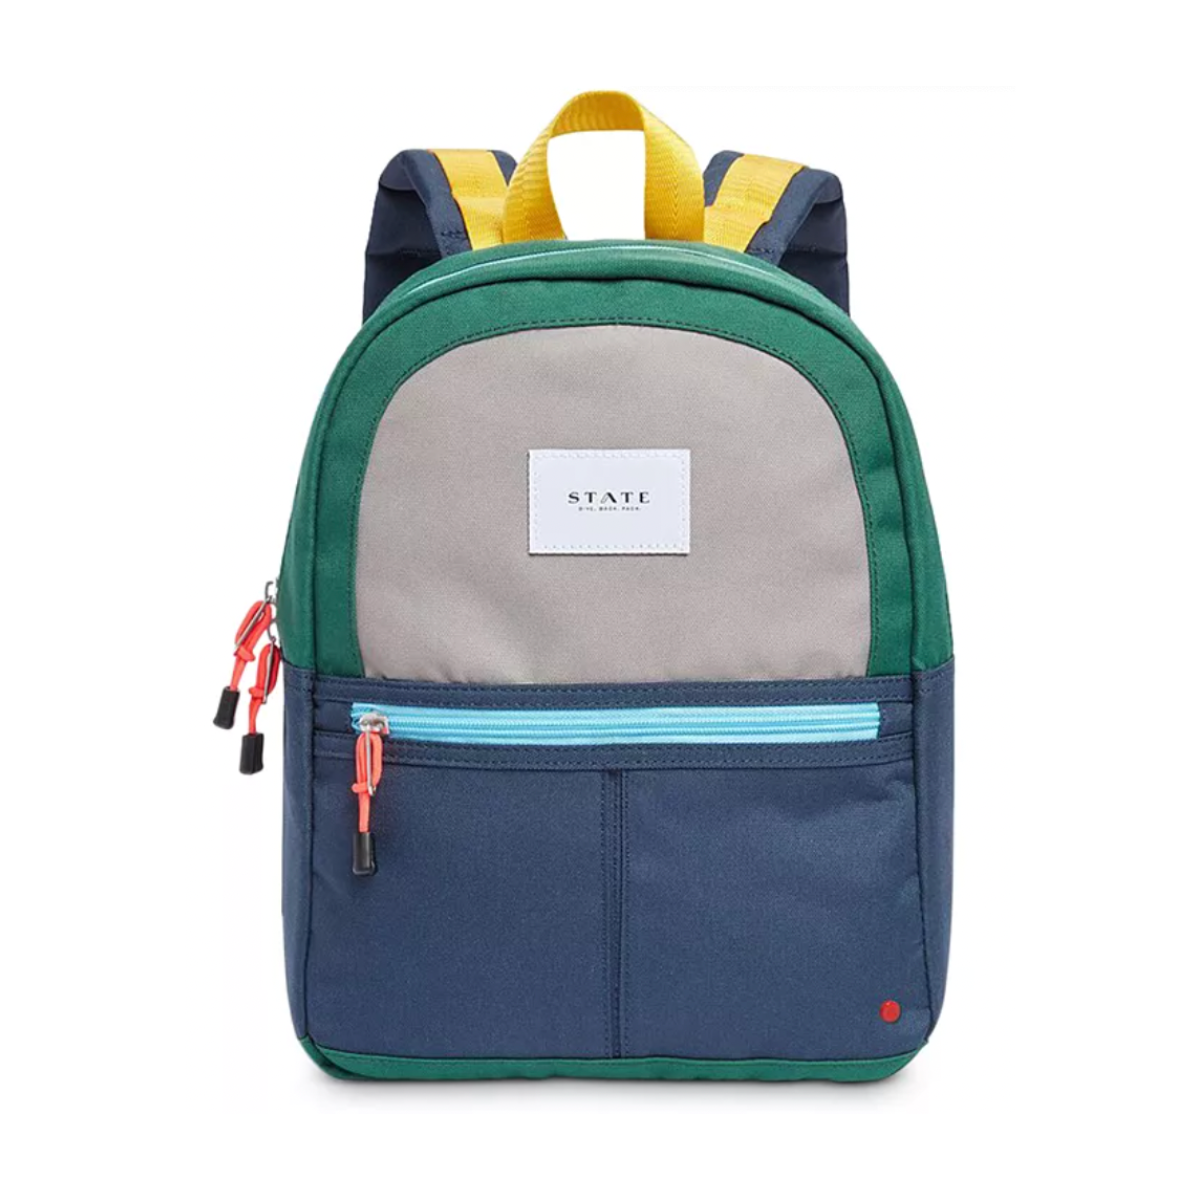 12 Best Toddler Backpacks for Preschool and Daycare, According to Parents